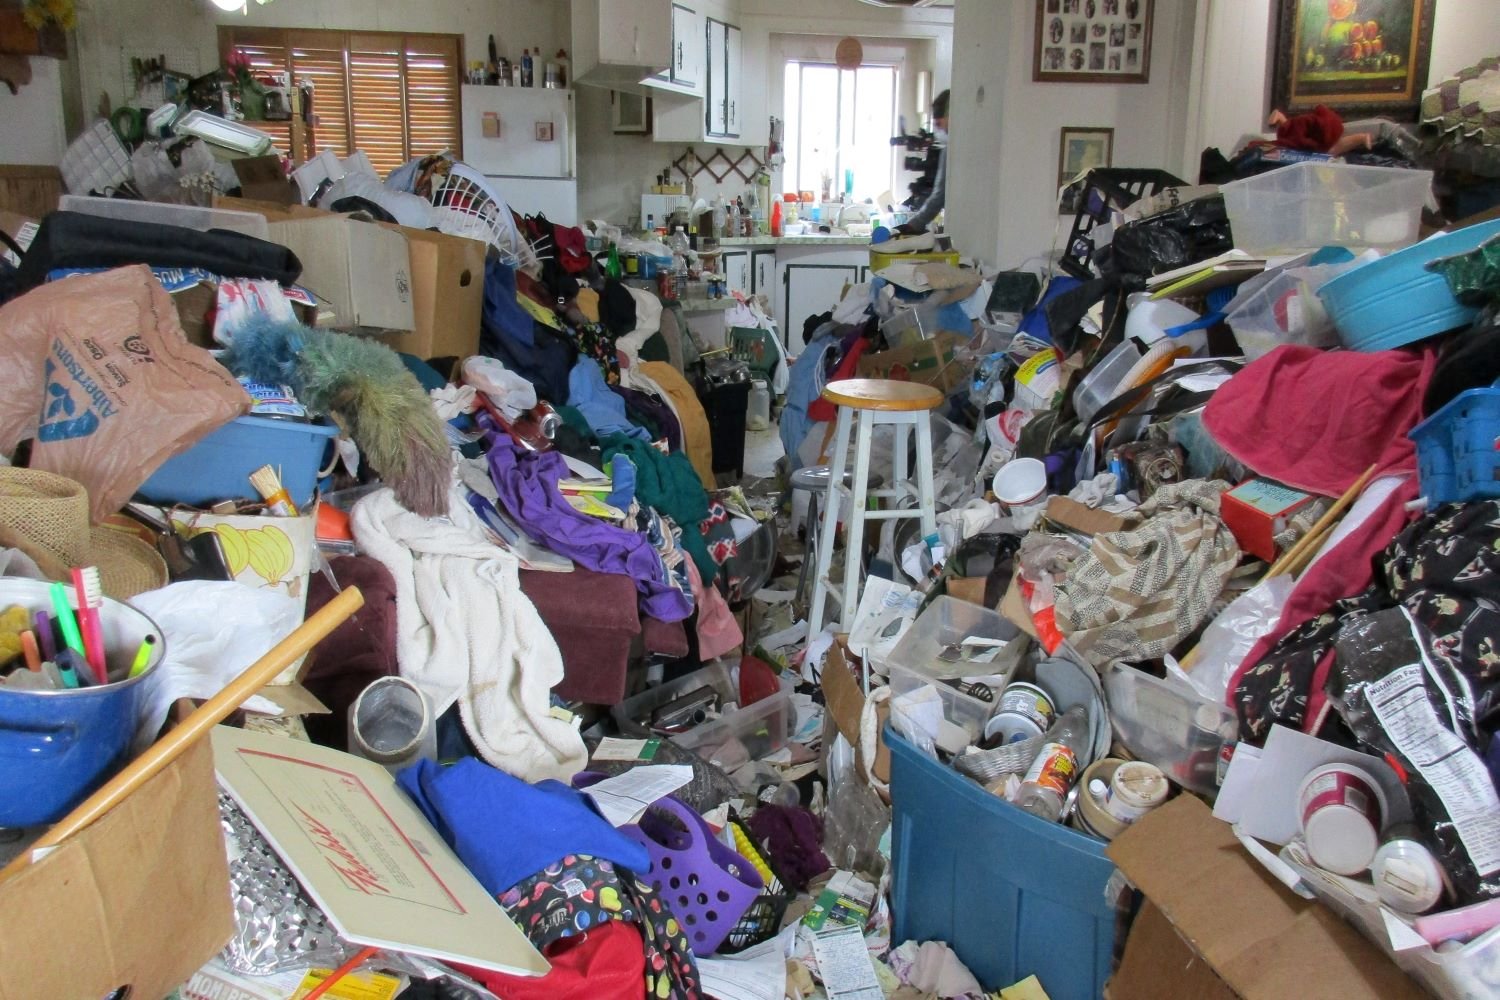 hoarders room. can't even get in